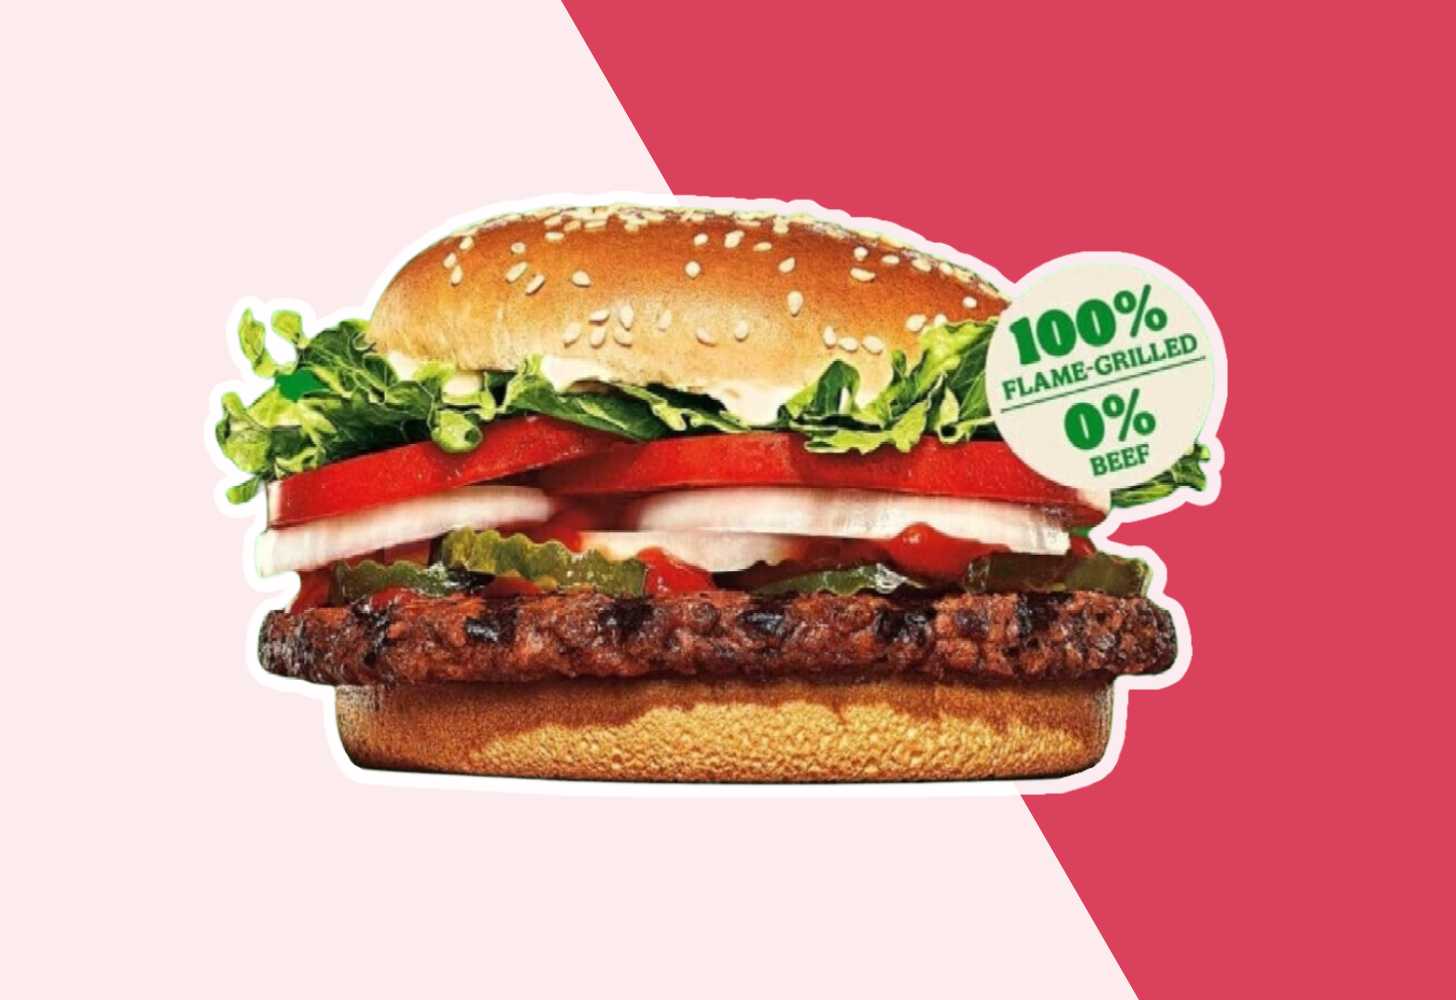 Impossible Whopper, with words that says 100 Flame-Grilled 0% Beef